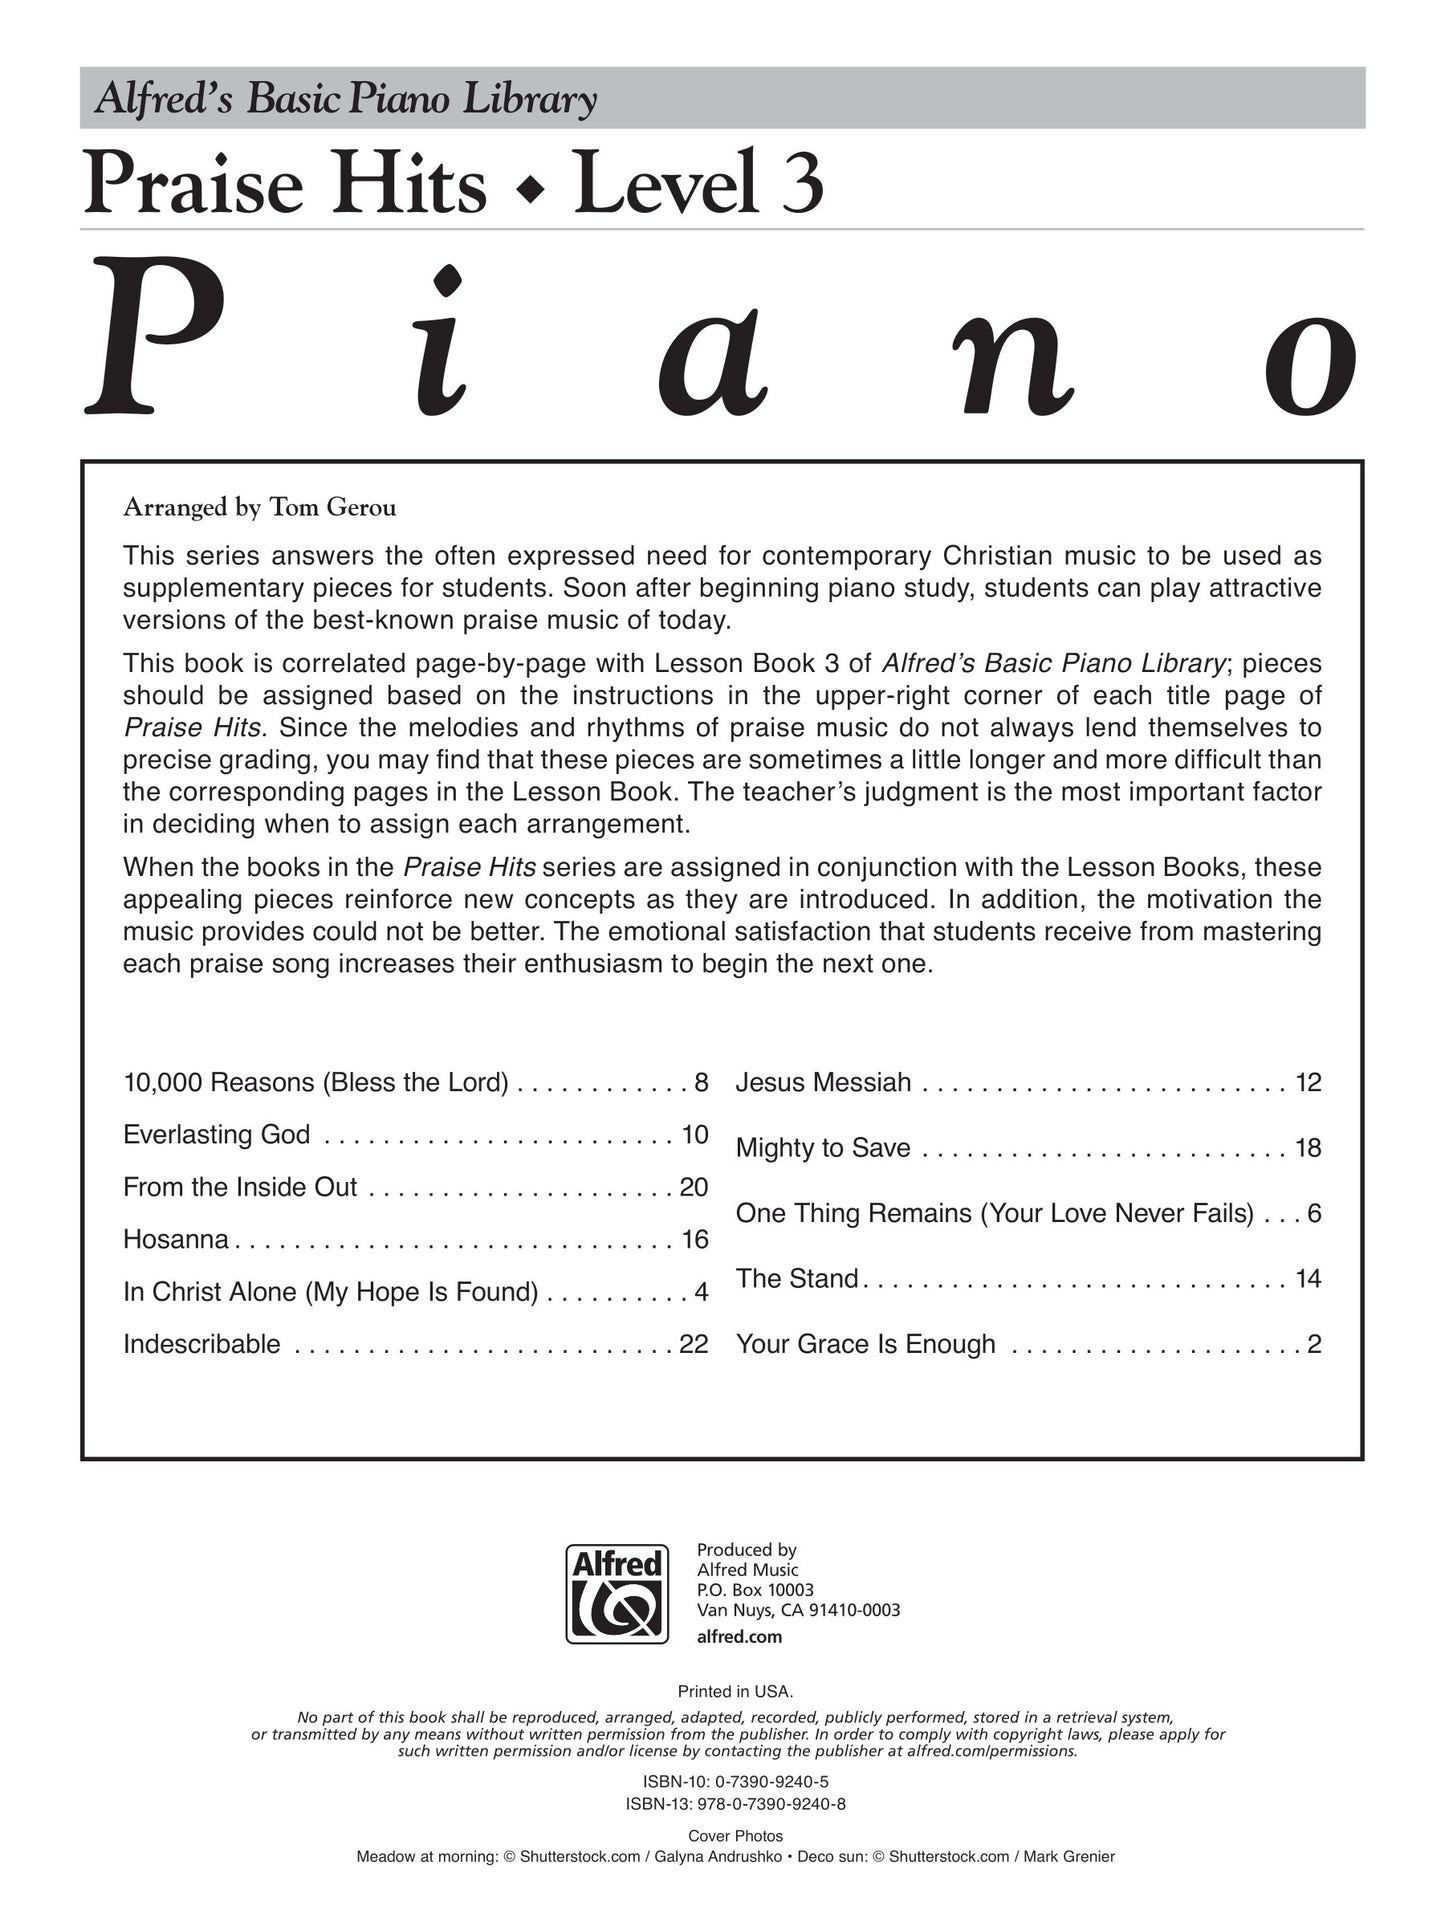 Alfred's Basic Piano Library - Praise Hits Level 3 Book